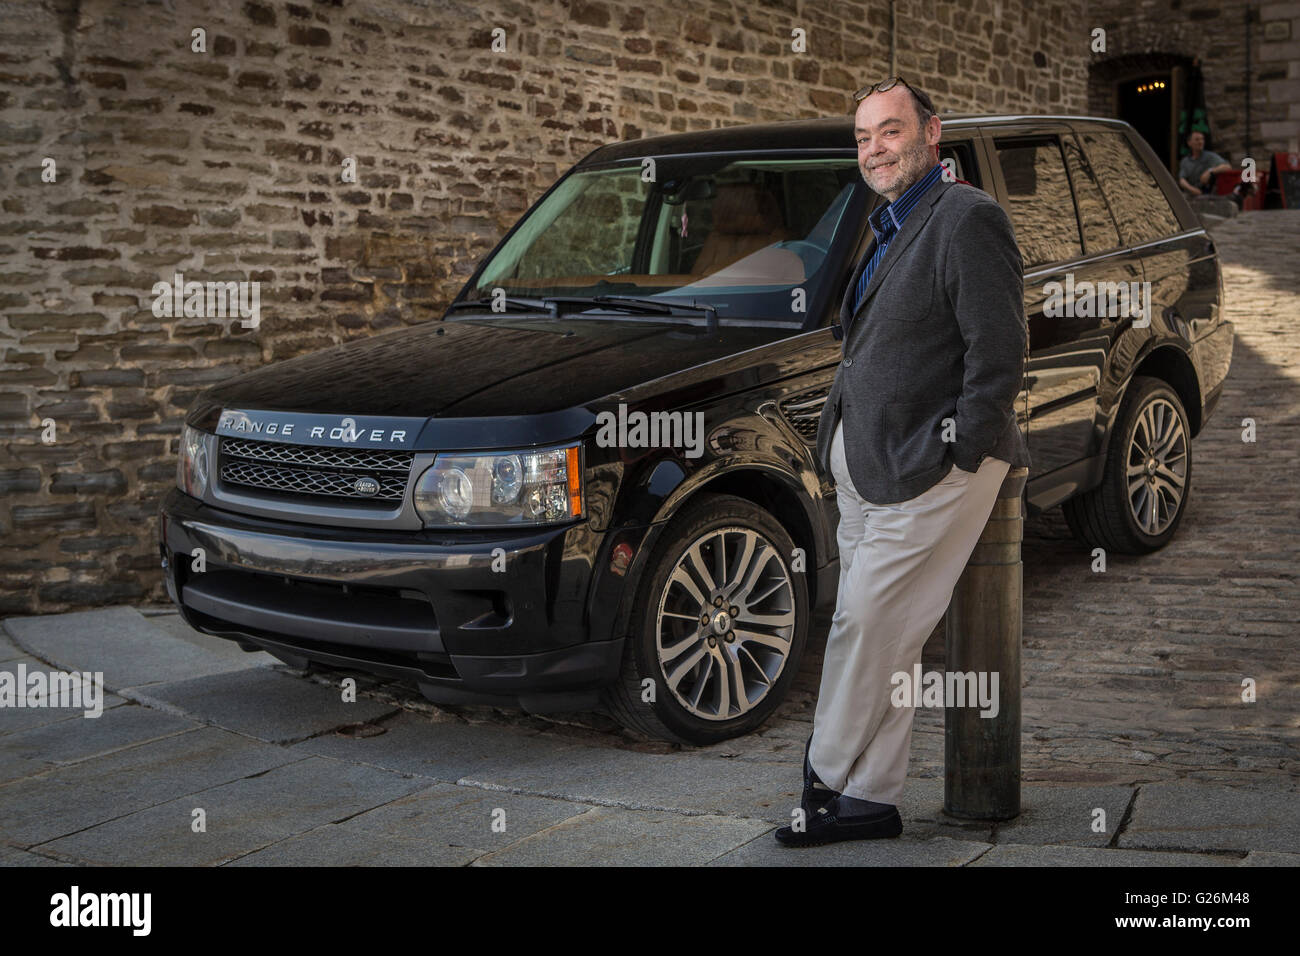 Jean Brouillard, CEO of communication Jean Brouillard, is pictured with his Range Rover in Quebec city on May 4, 2015 Stock Photo